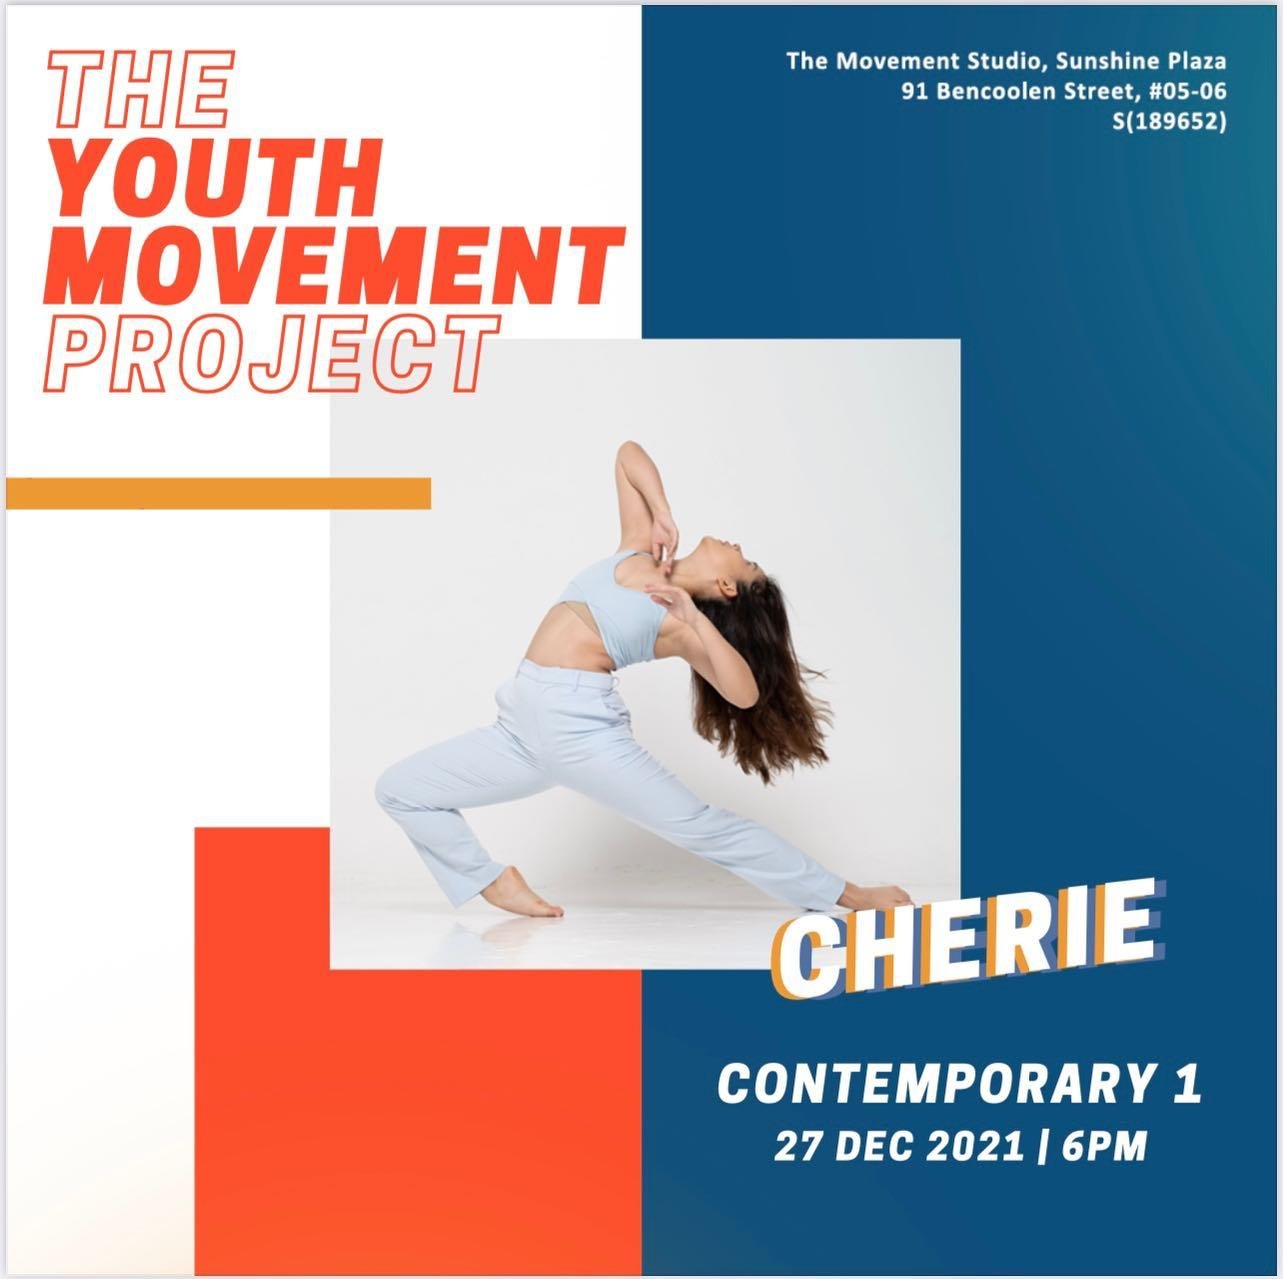 The Youth Movement Project